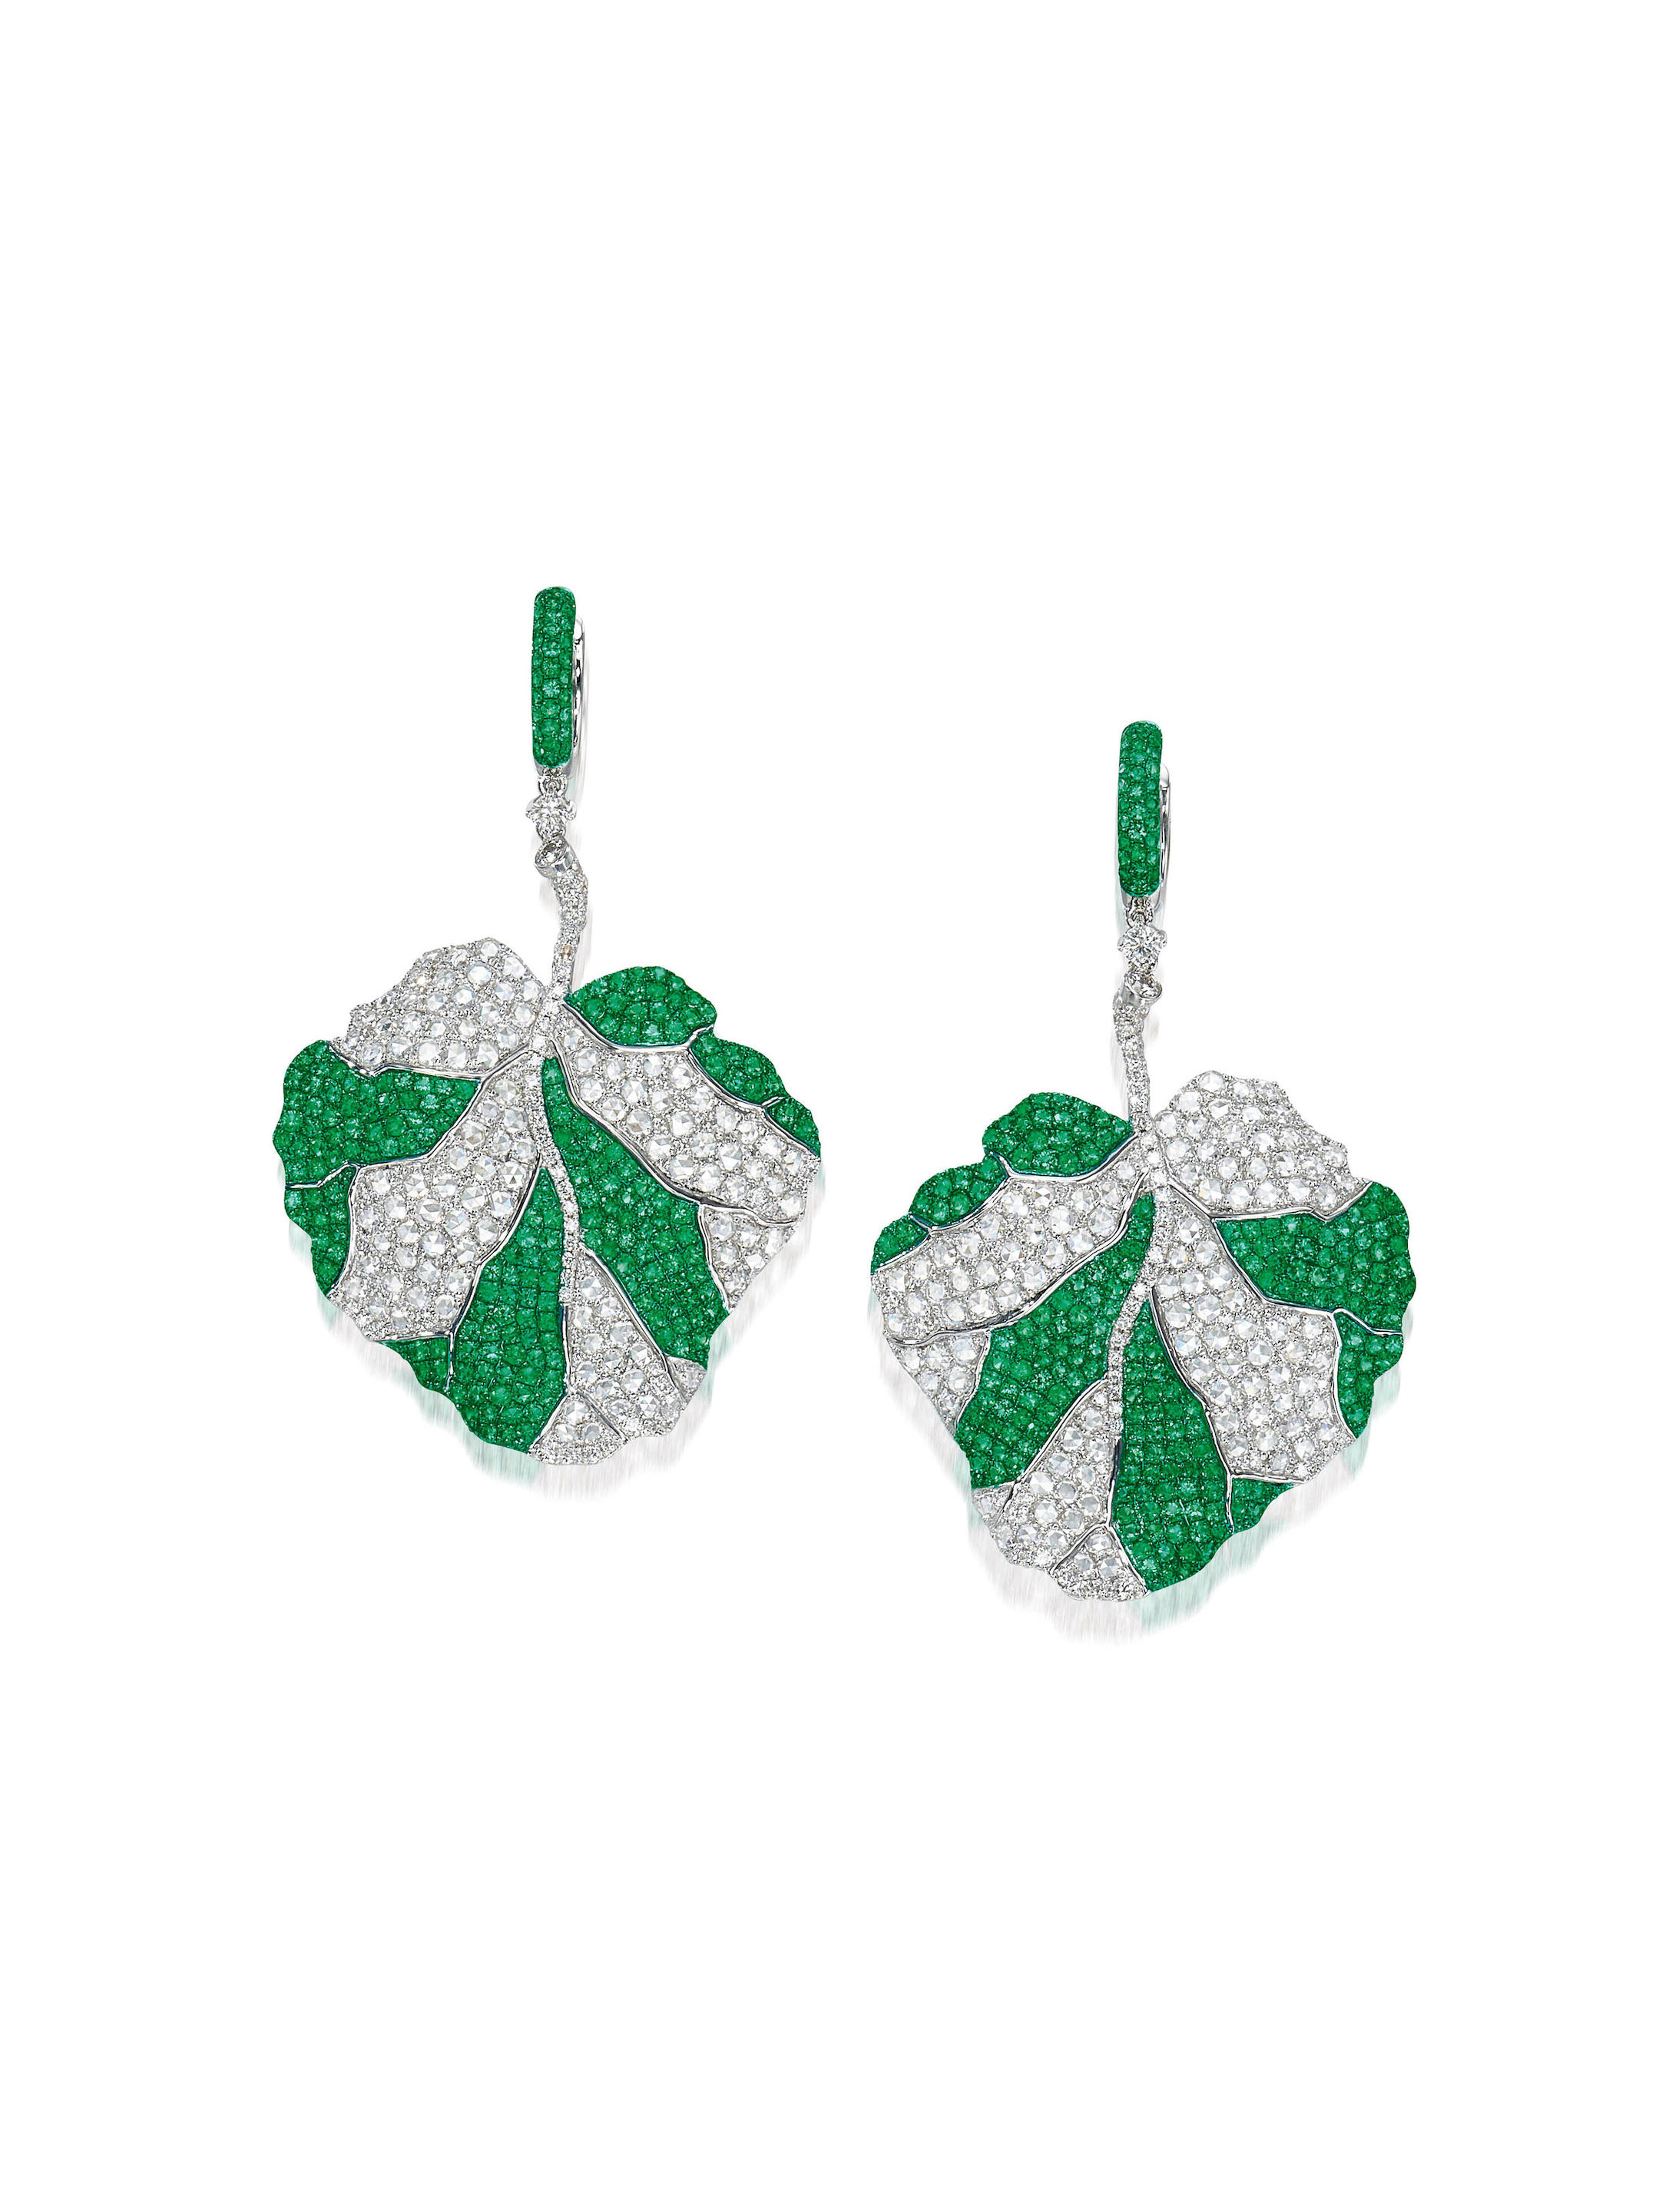 A PAIR OF EMERALD AND DIAMOND LEAF EARRINGS